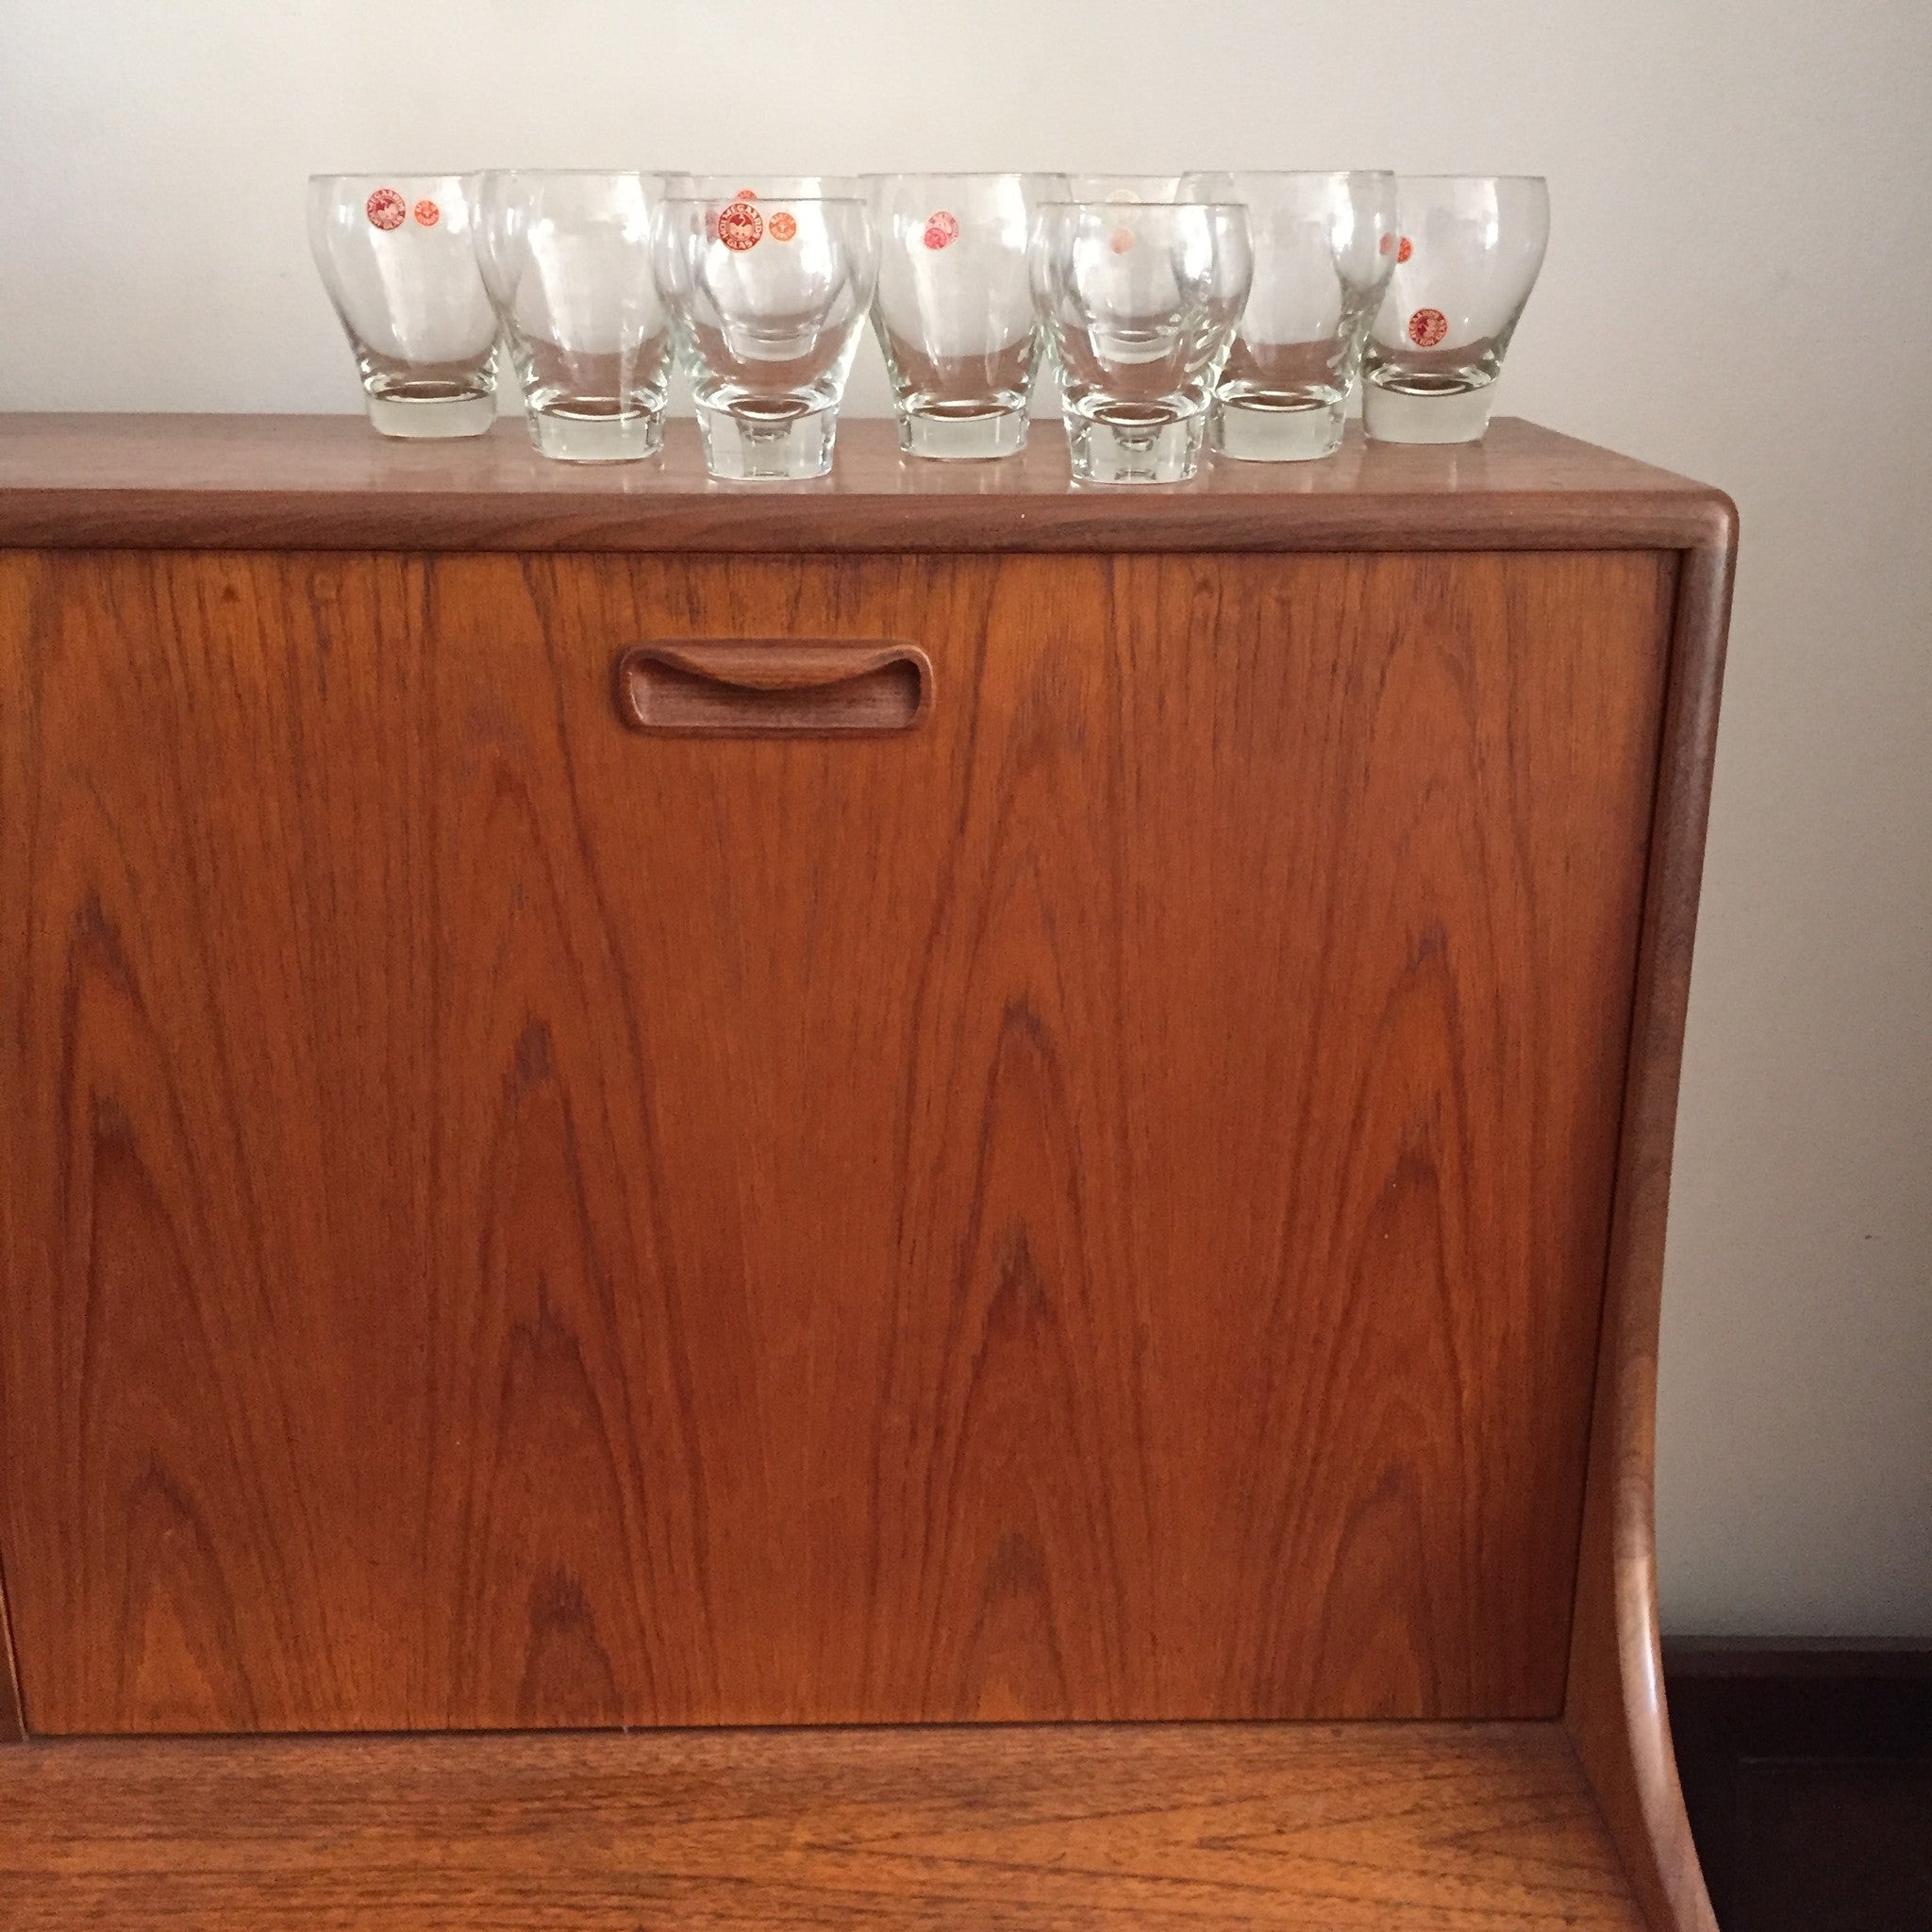 SOLD Living in Style with Per Lütken (1916-1998) Holmegaard Danish Glass Tumblers (8 pieces)